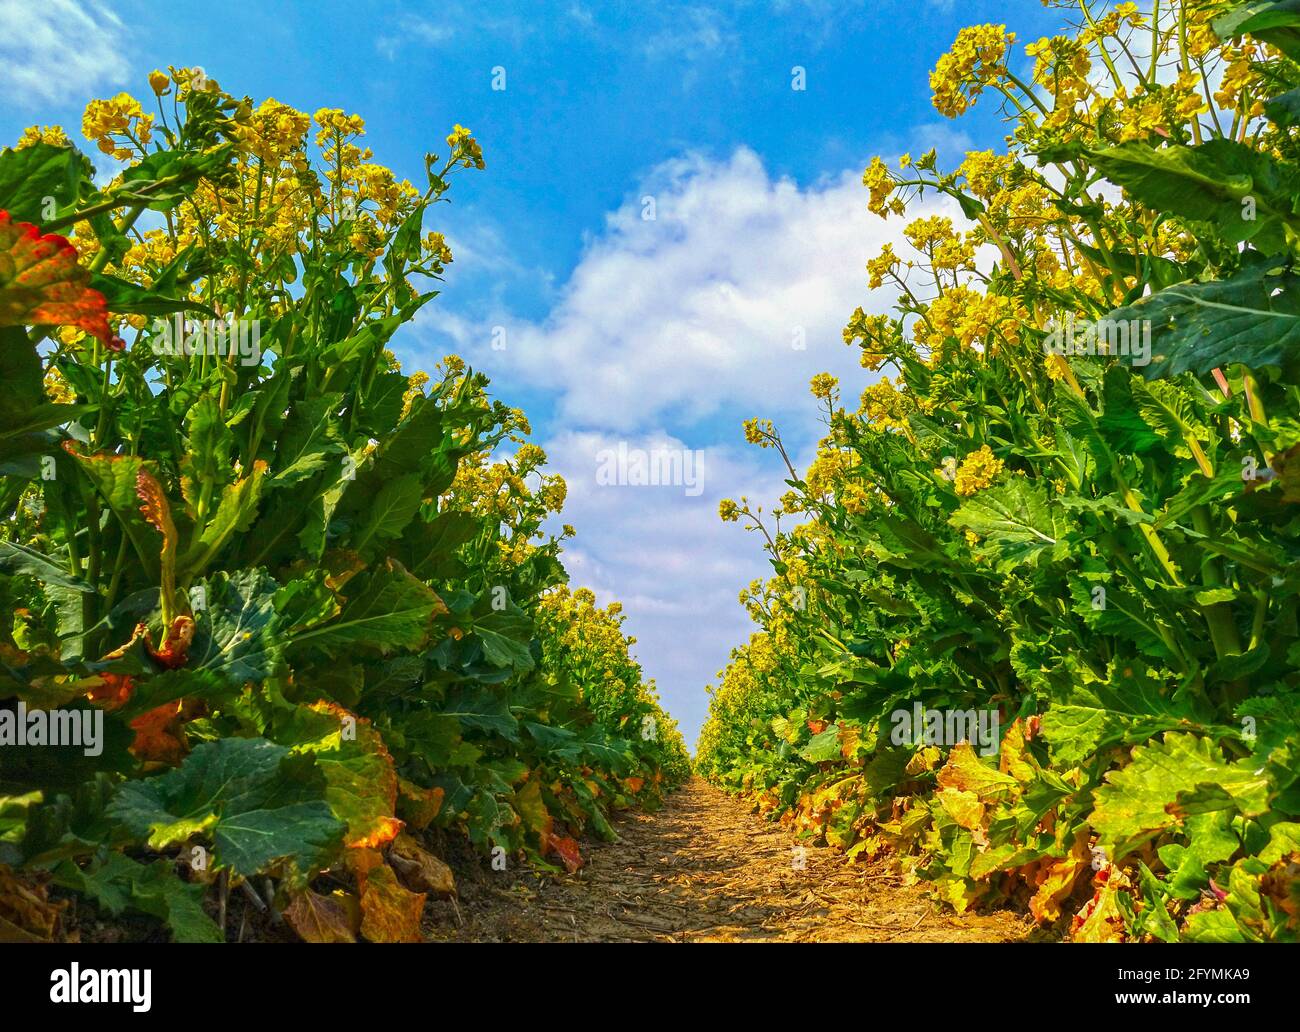 Field of bright yellow flowering rapeseed, Brassica napus, in spring. Stock Photo